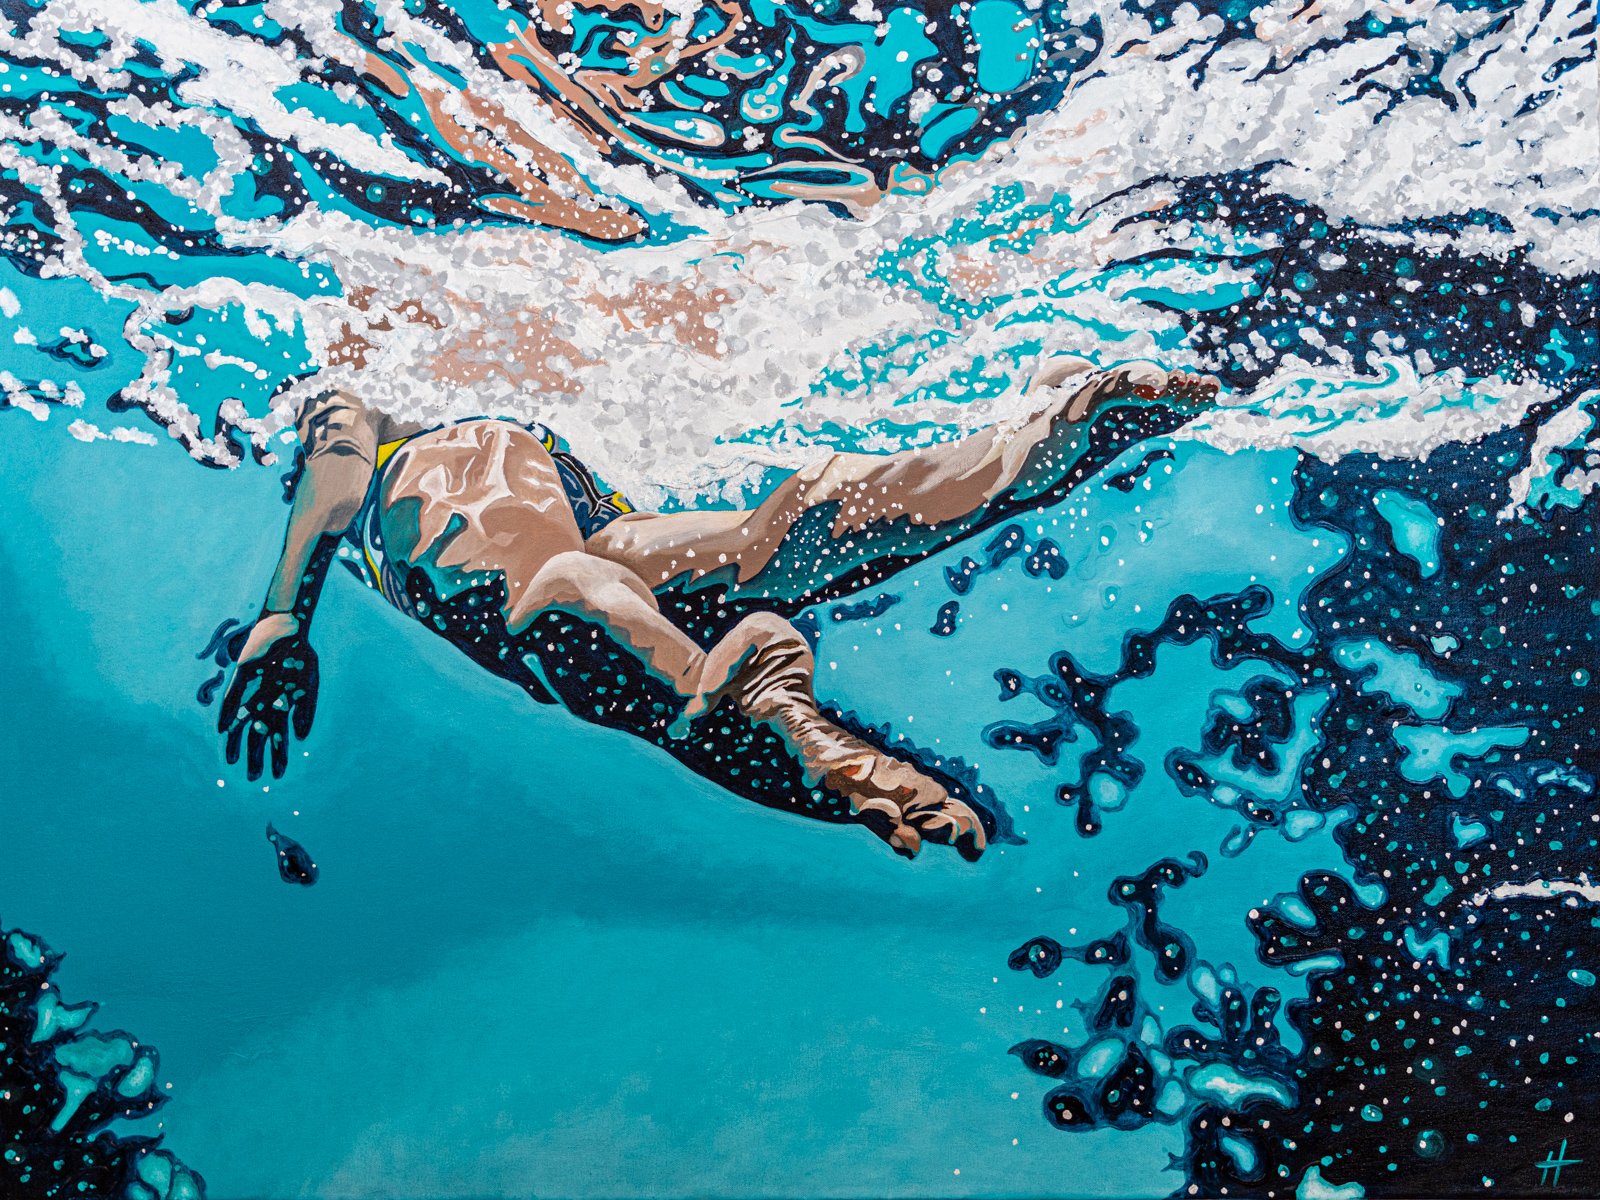 Heather Perry's painting of a swimmer underwater from behind and below looking up at the sun bouncing off the water and bubbles